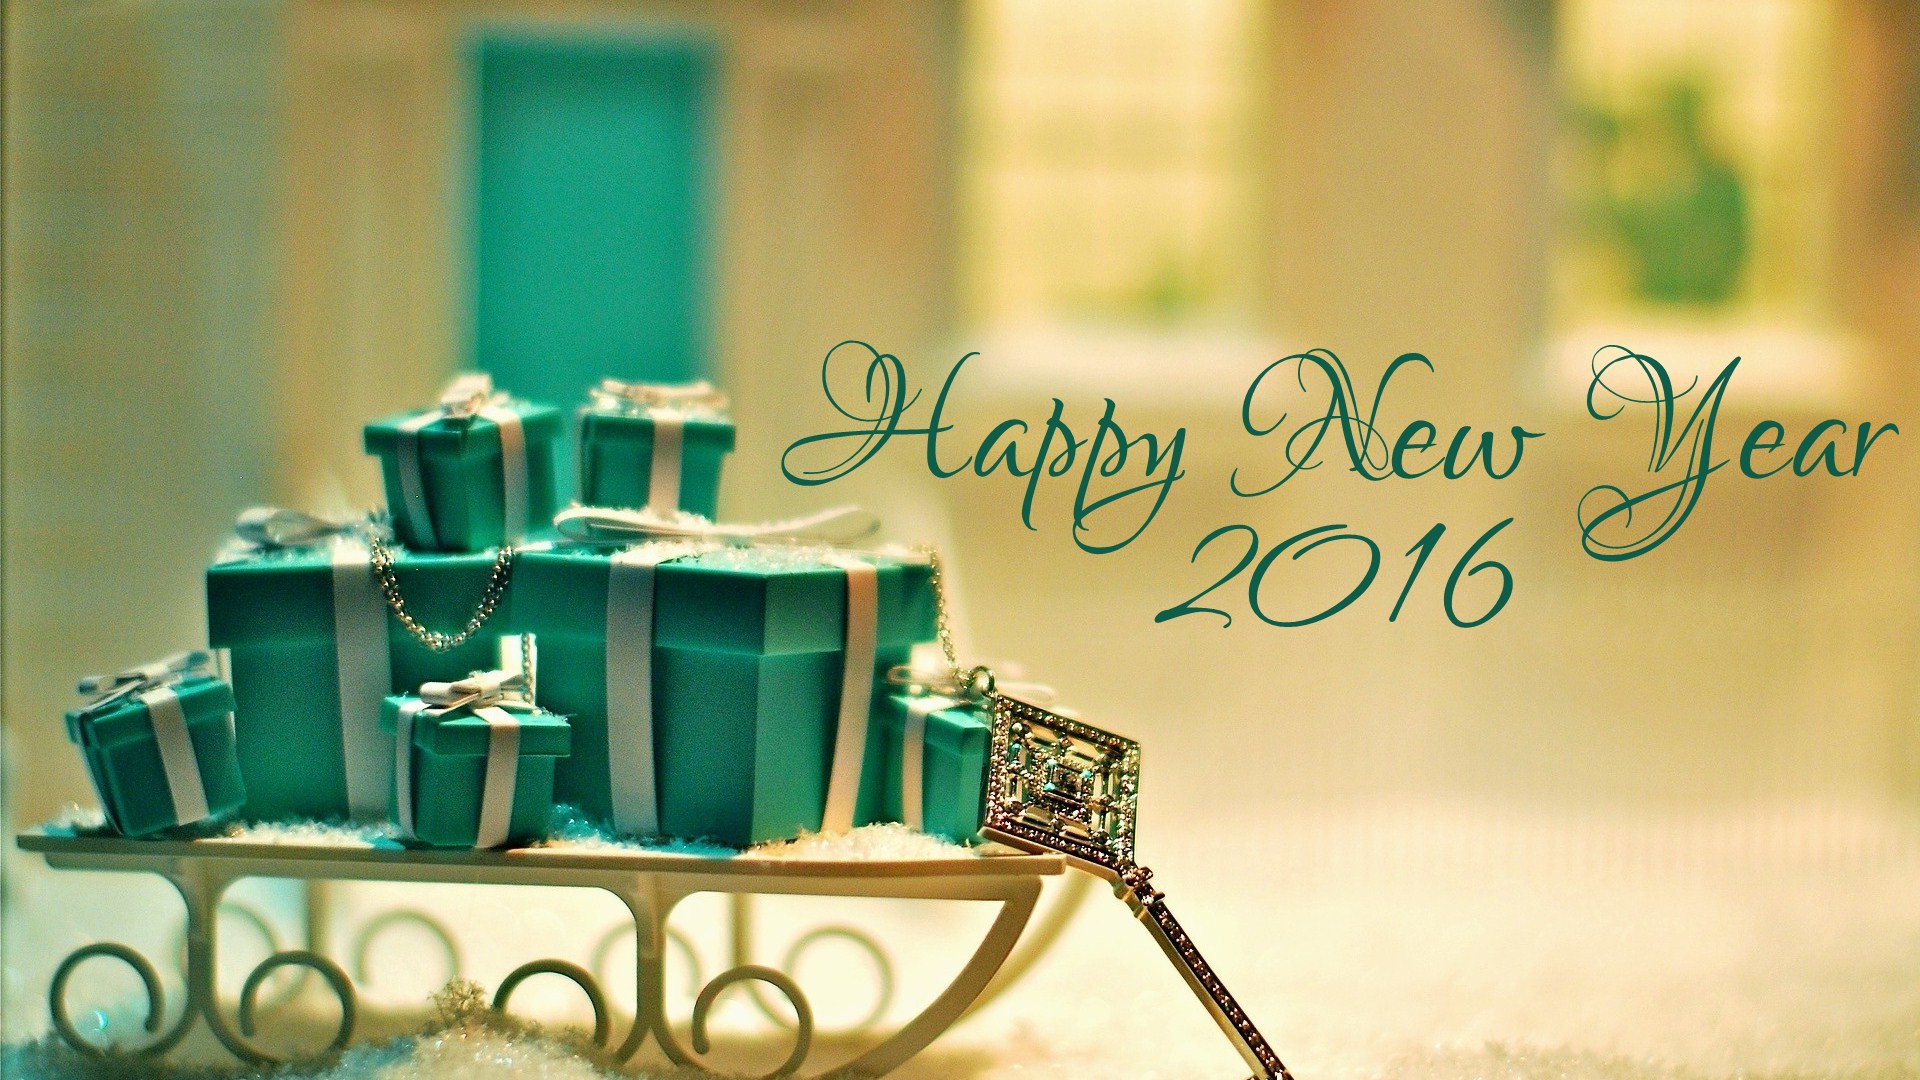 Happy New Year 2016 SMS Wishes And Desktop Wallpapers Download 1920x1080